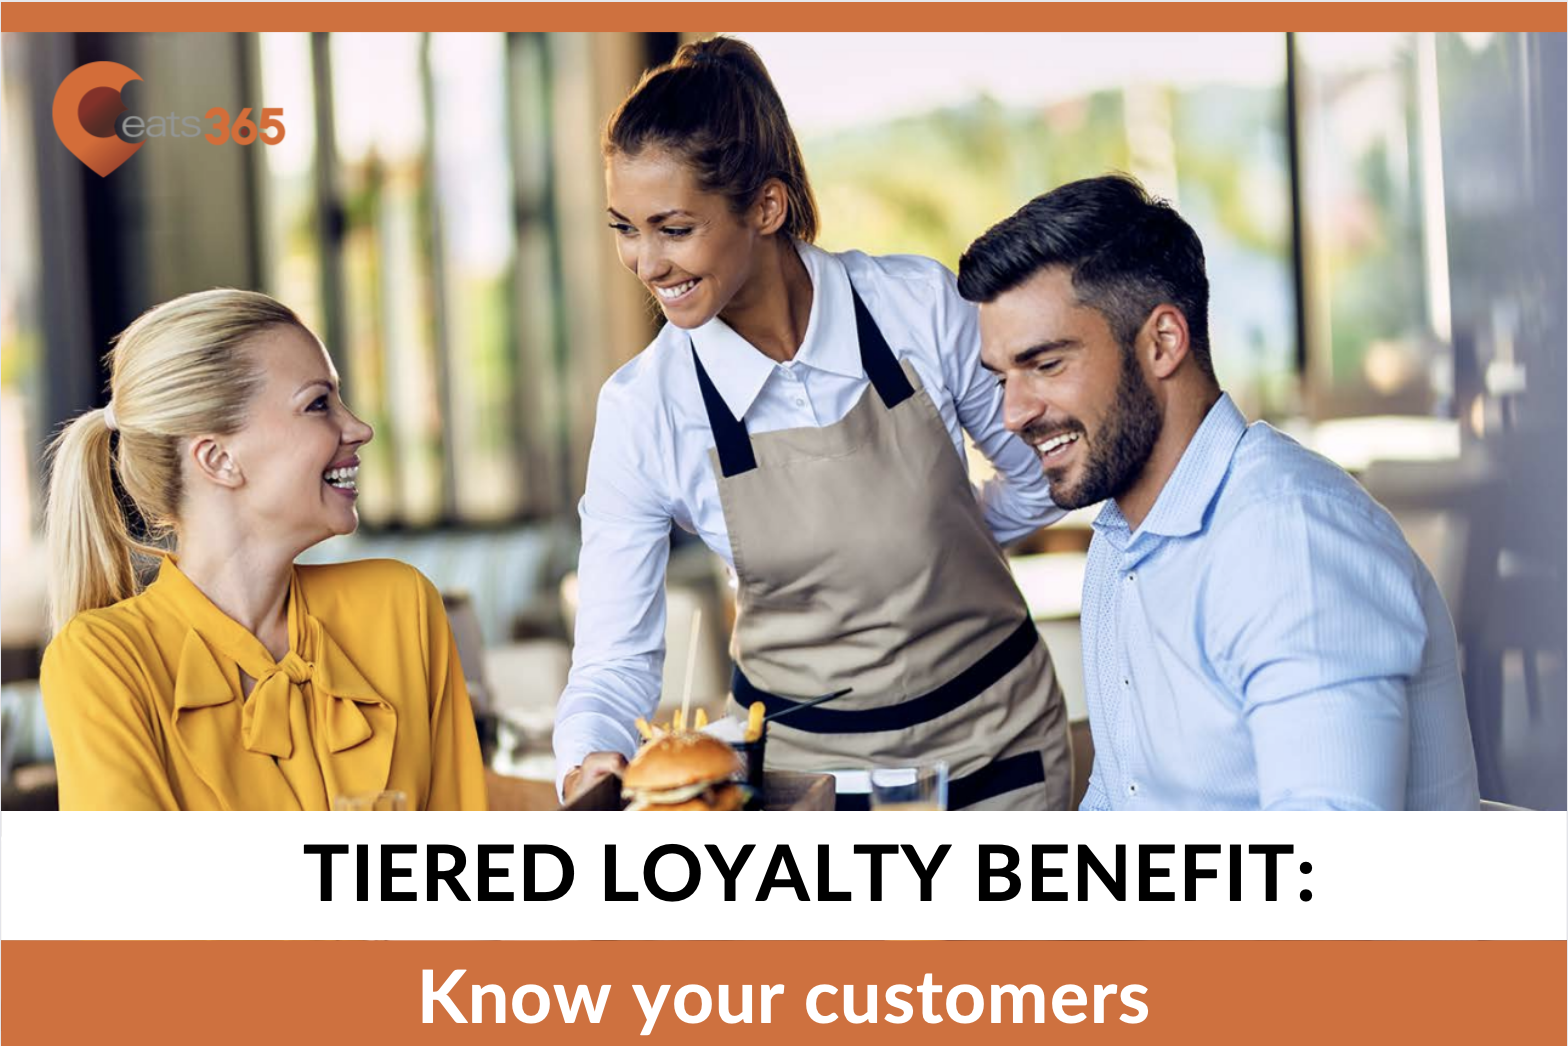 tiered loyalty program benefit: know your customers